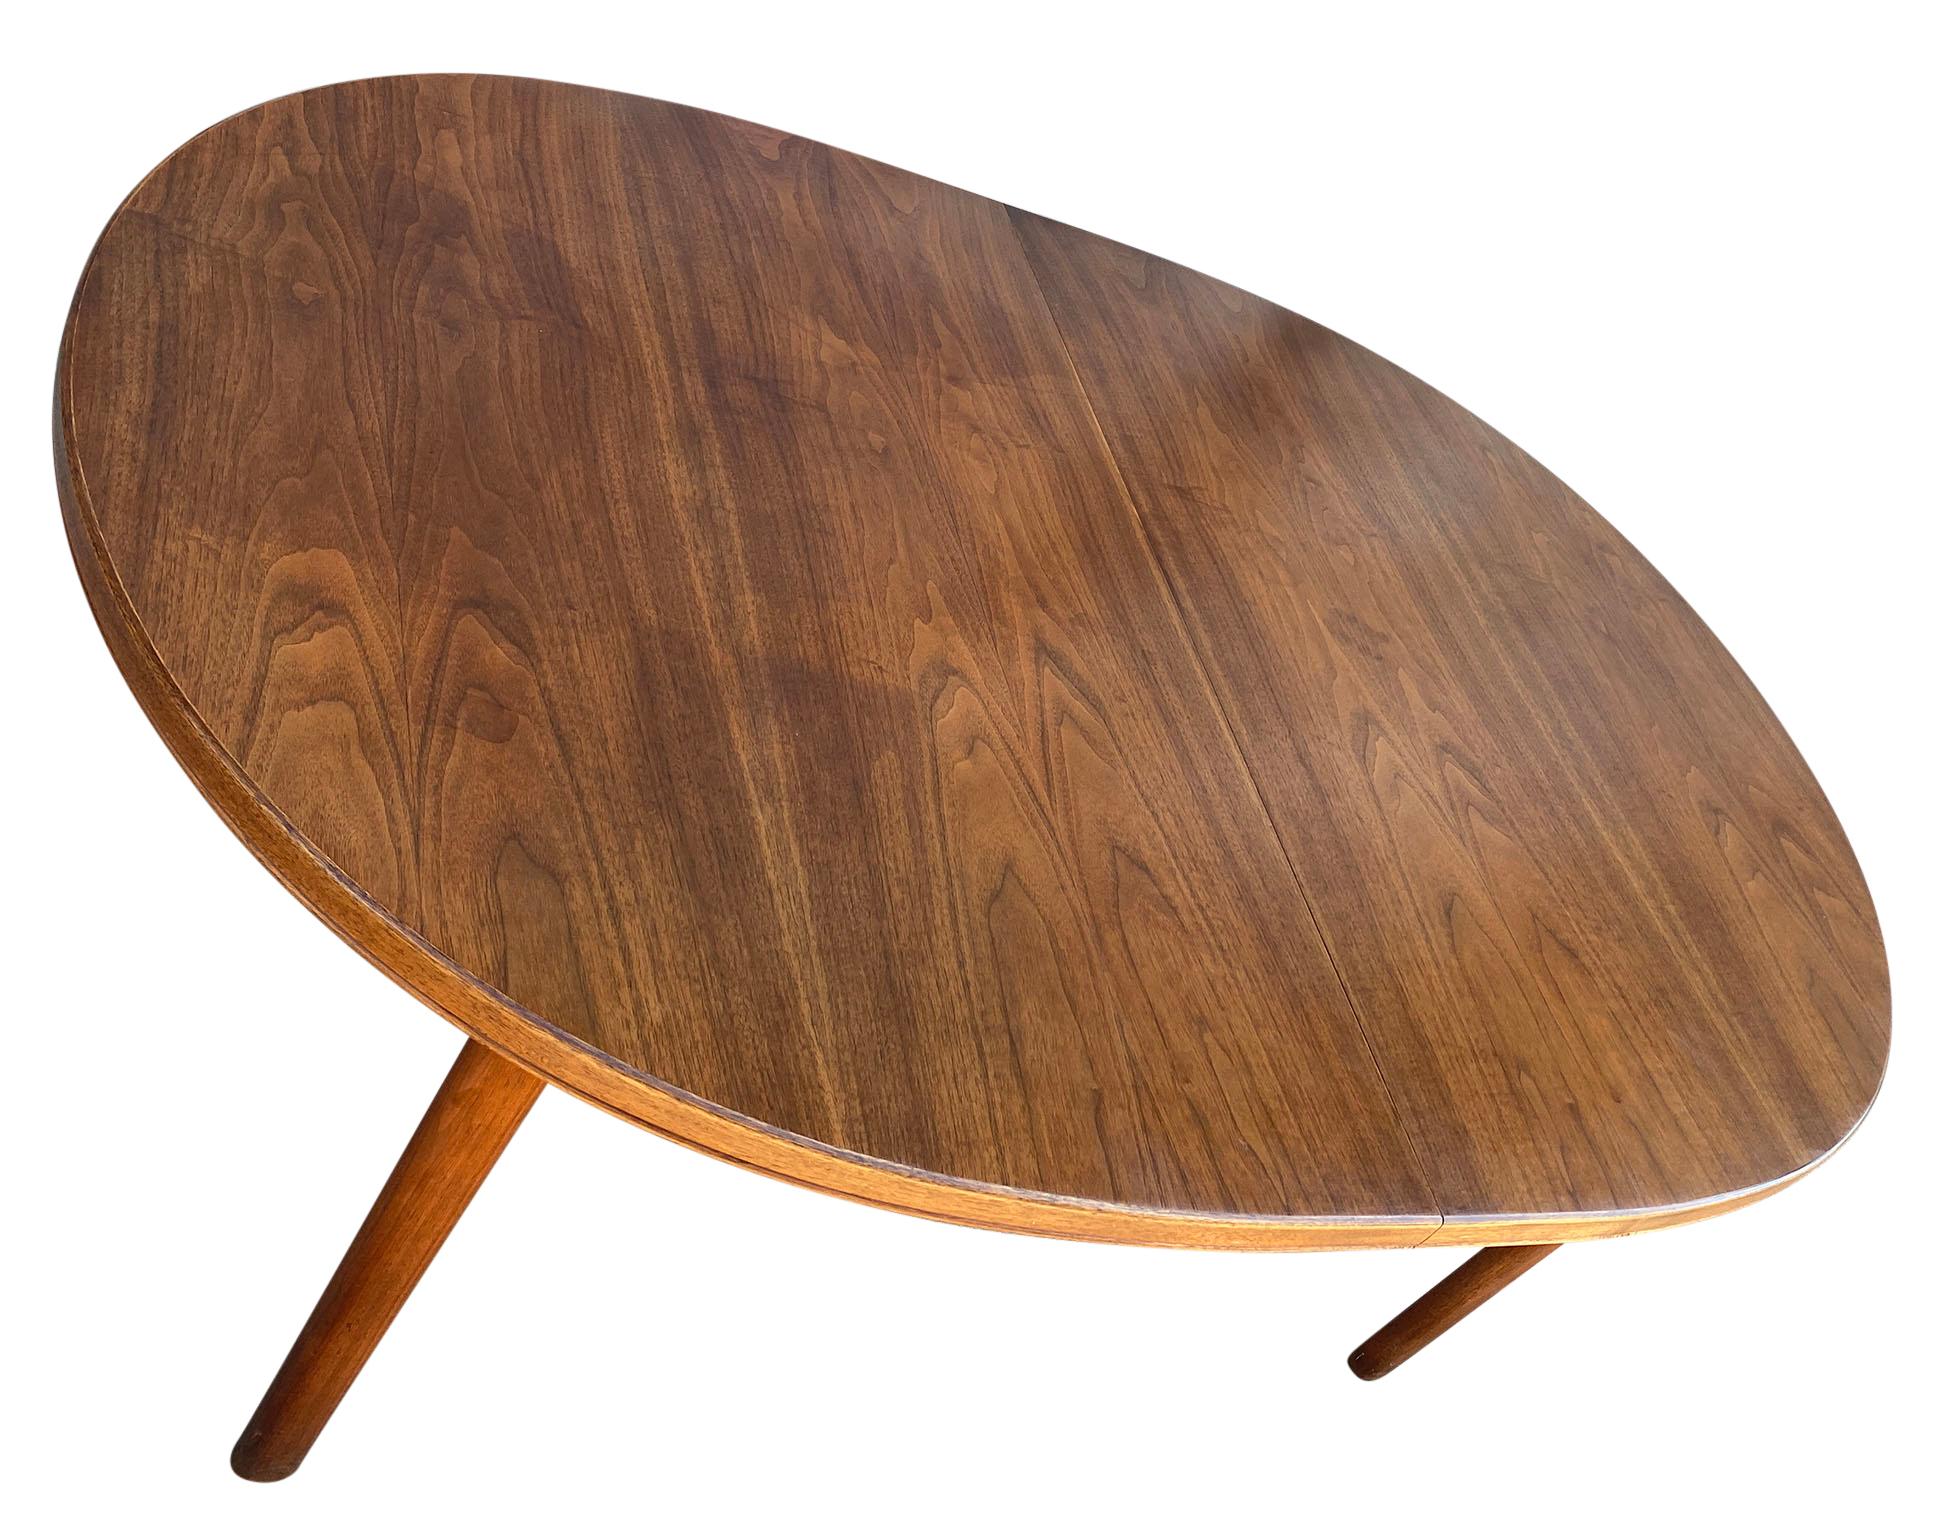 Midcentury solid teak Elliptical oval Danish Swedish dining table. This table is very high quality hand built in Sweden. Solid teak legs with 4 leg base. This table is in great vintage condition, the (0) leaves. Beautiful wood grain. Beautiful teak